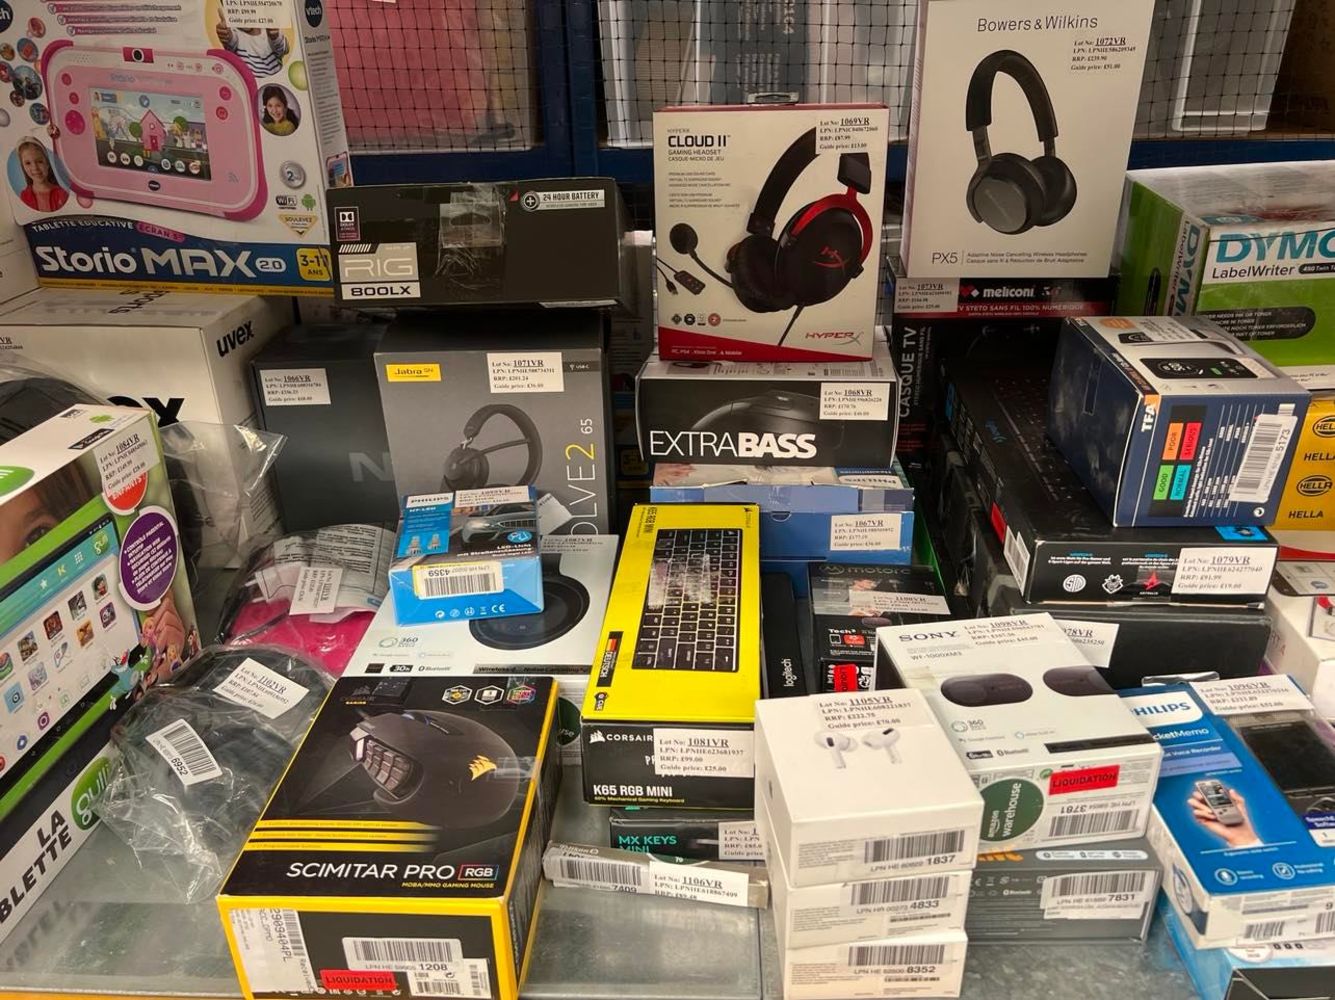 No reserve!Sale Up to 90%! Amazon Raw Returns !Jabra, Panasonic, Wired, Powerbeats, Grohe, Sonos !Scooters, Headphones, Watches, Air Purifiers !